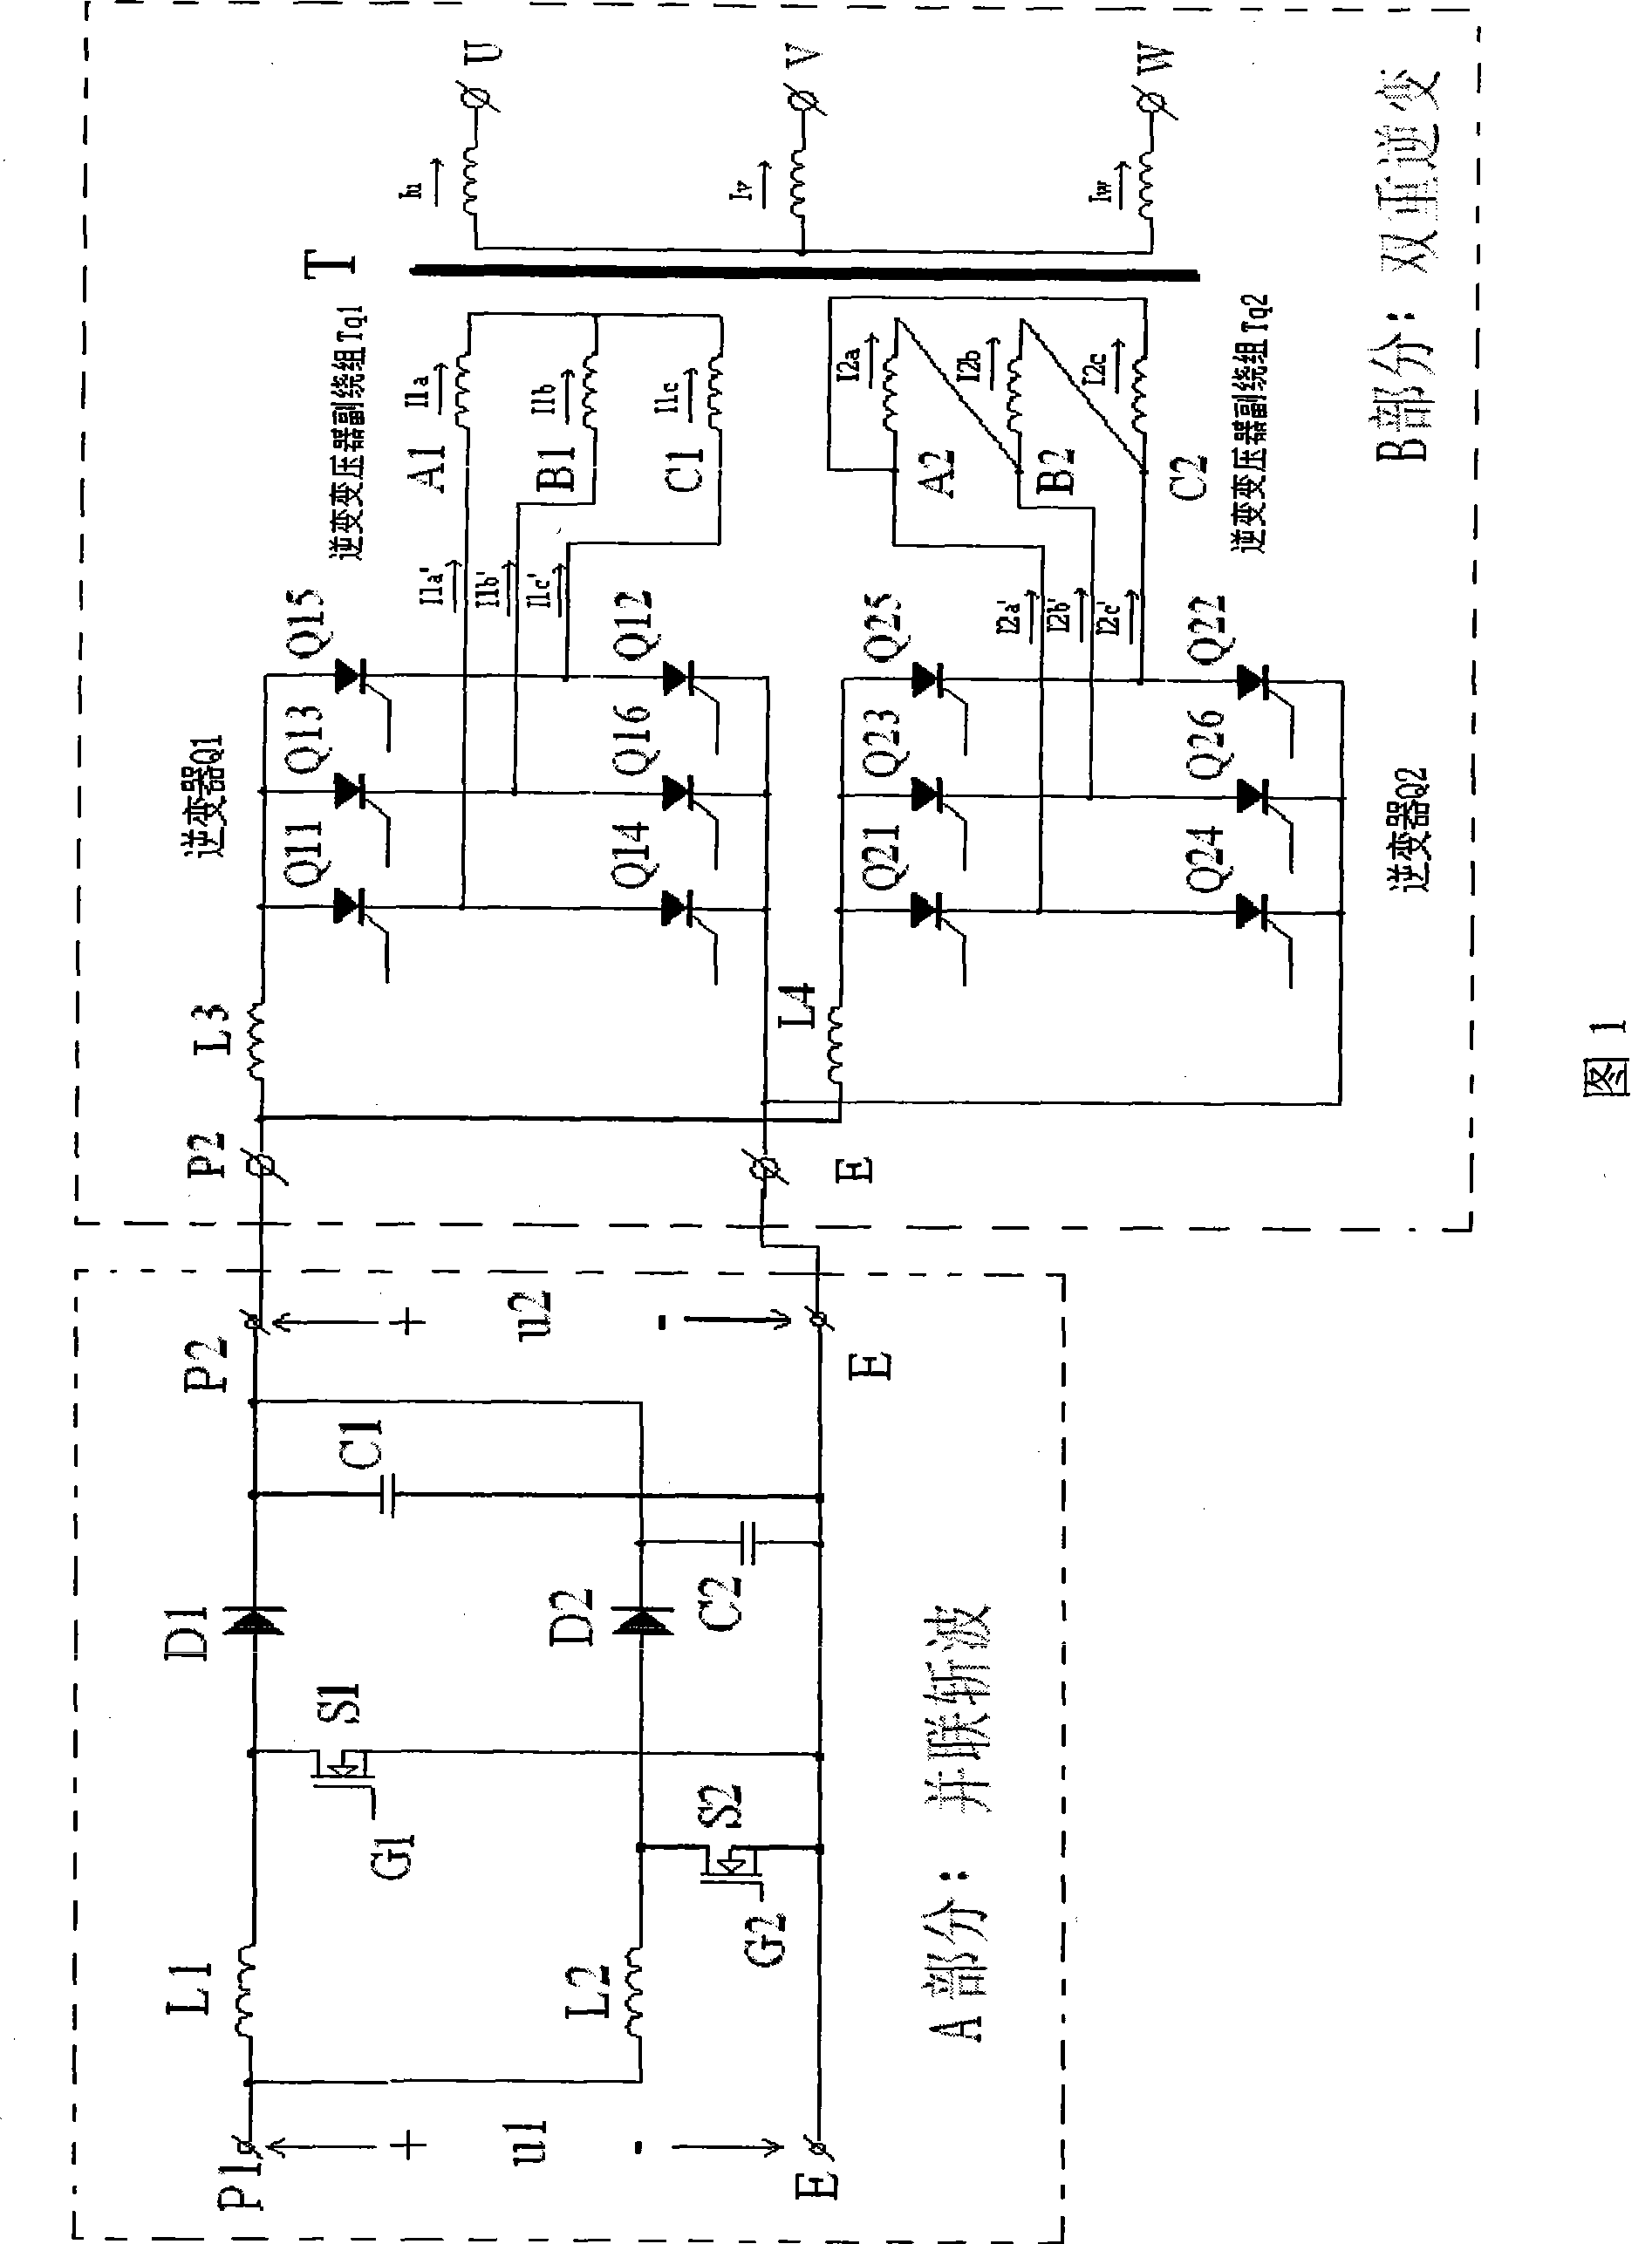 High-voltage motor parallel connection chopping and double-inversion speed-governing energy-saving controller